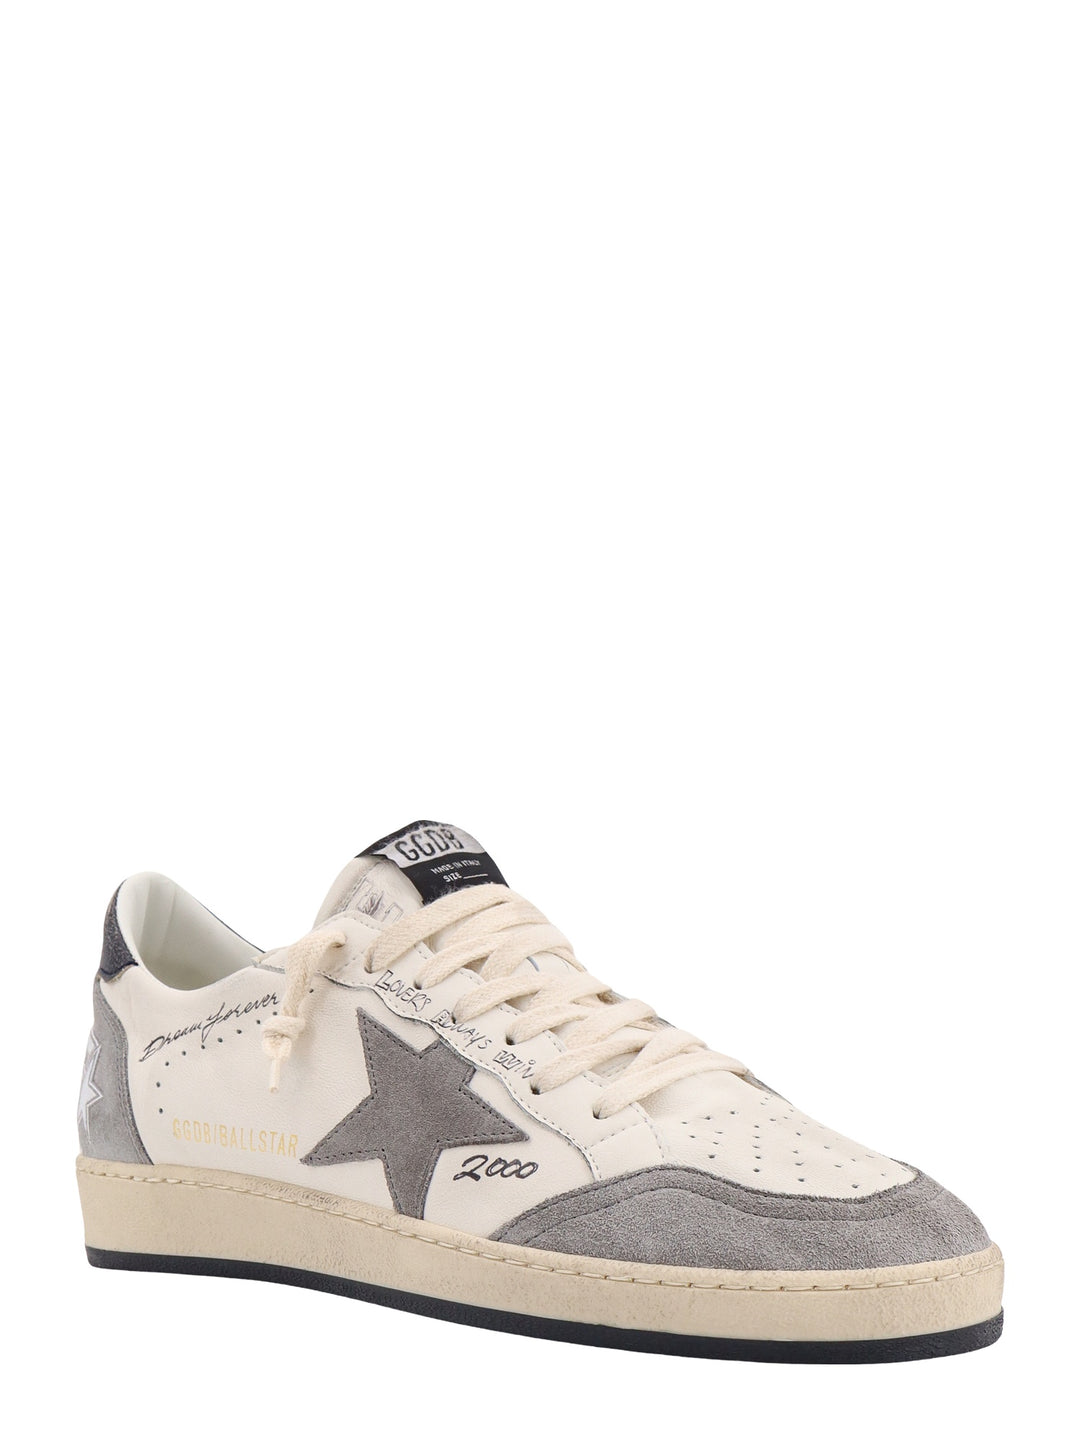 Sneakers in pelle e suede con stampe